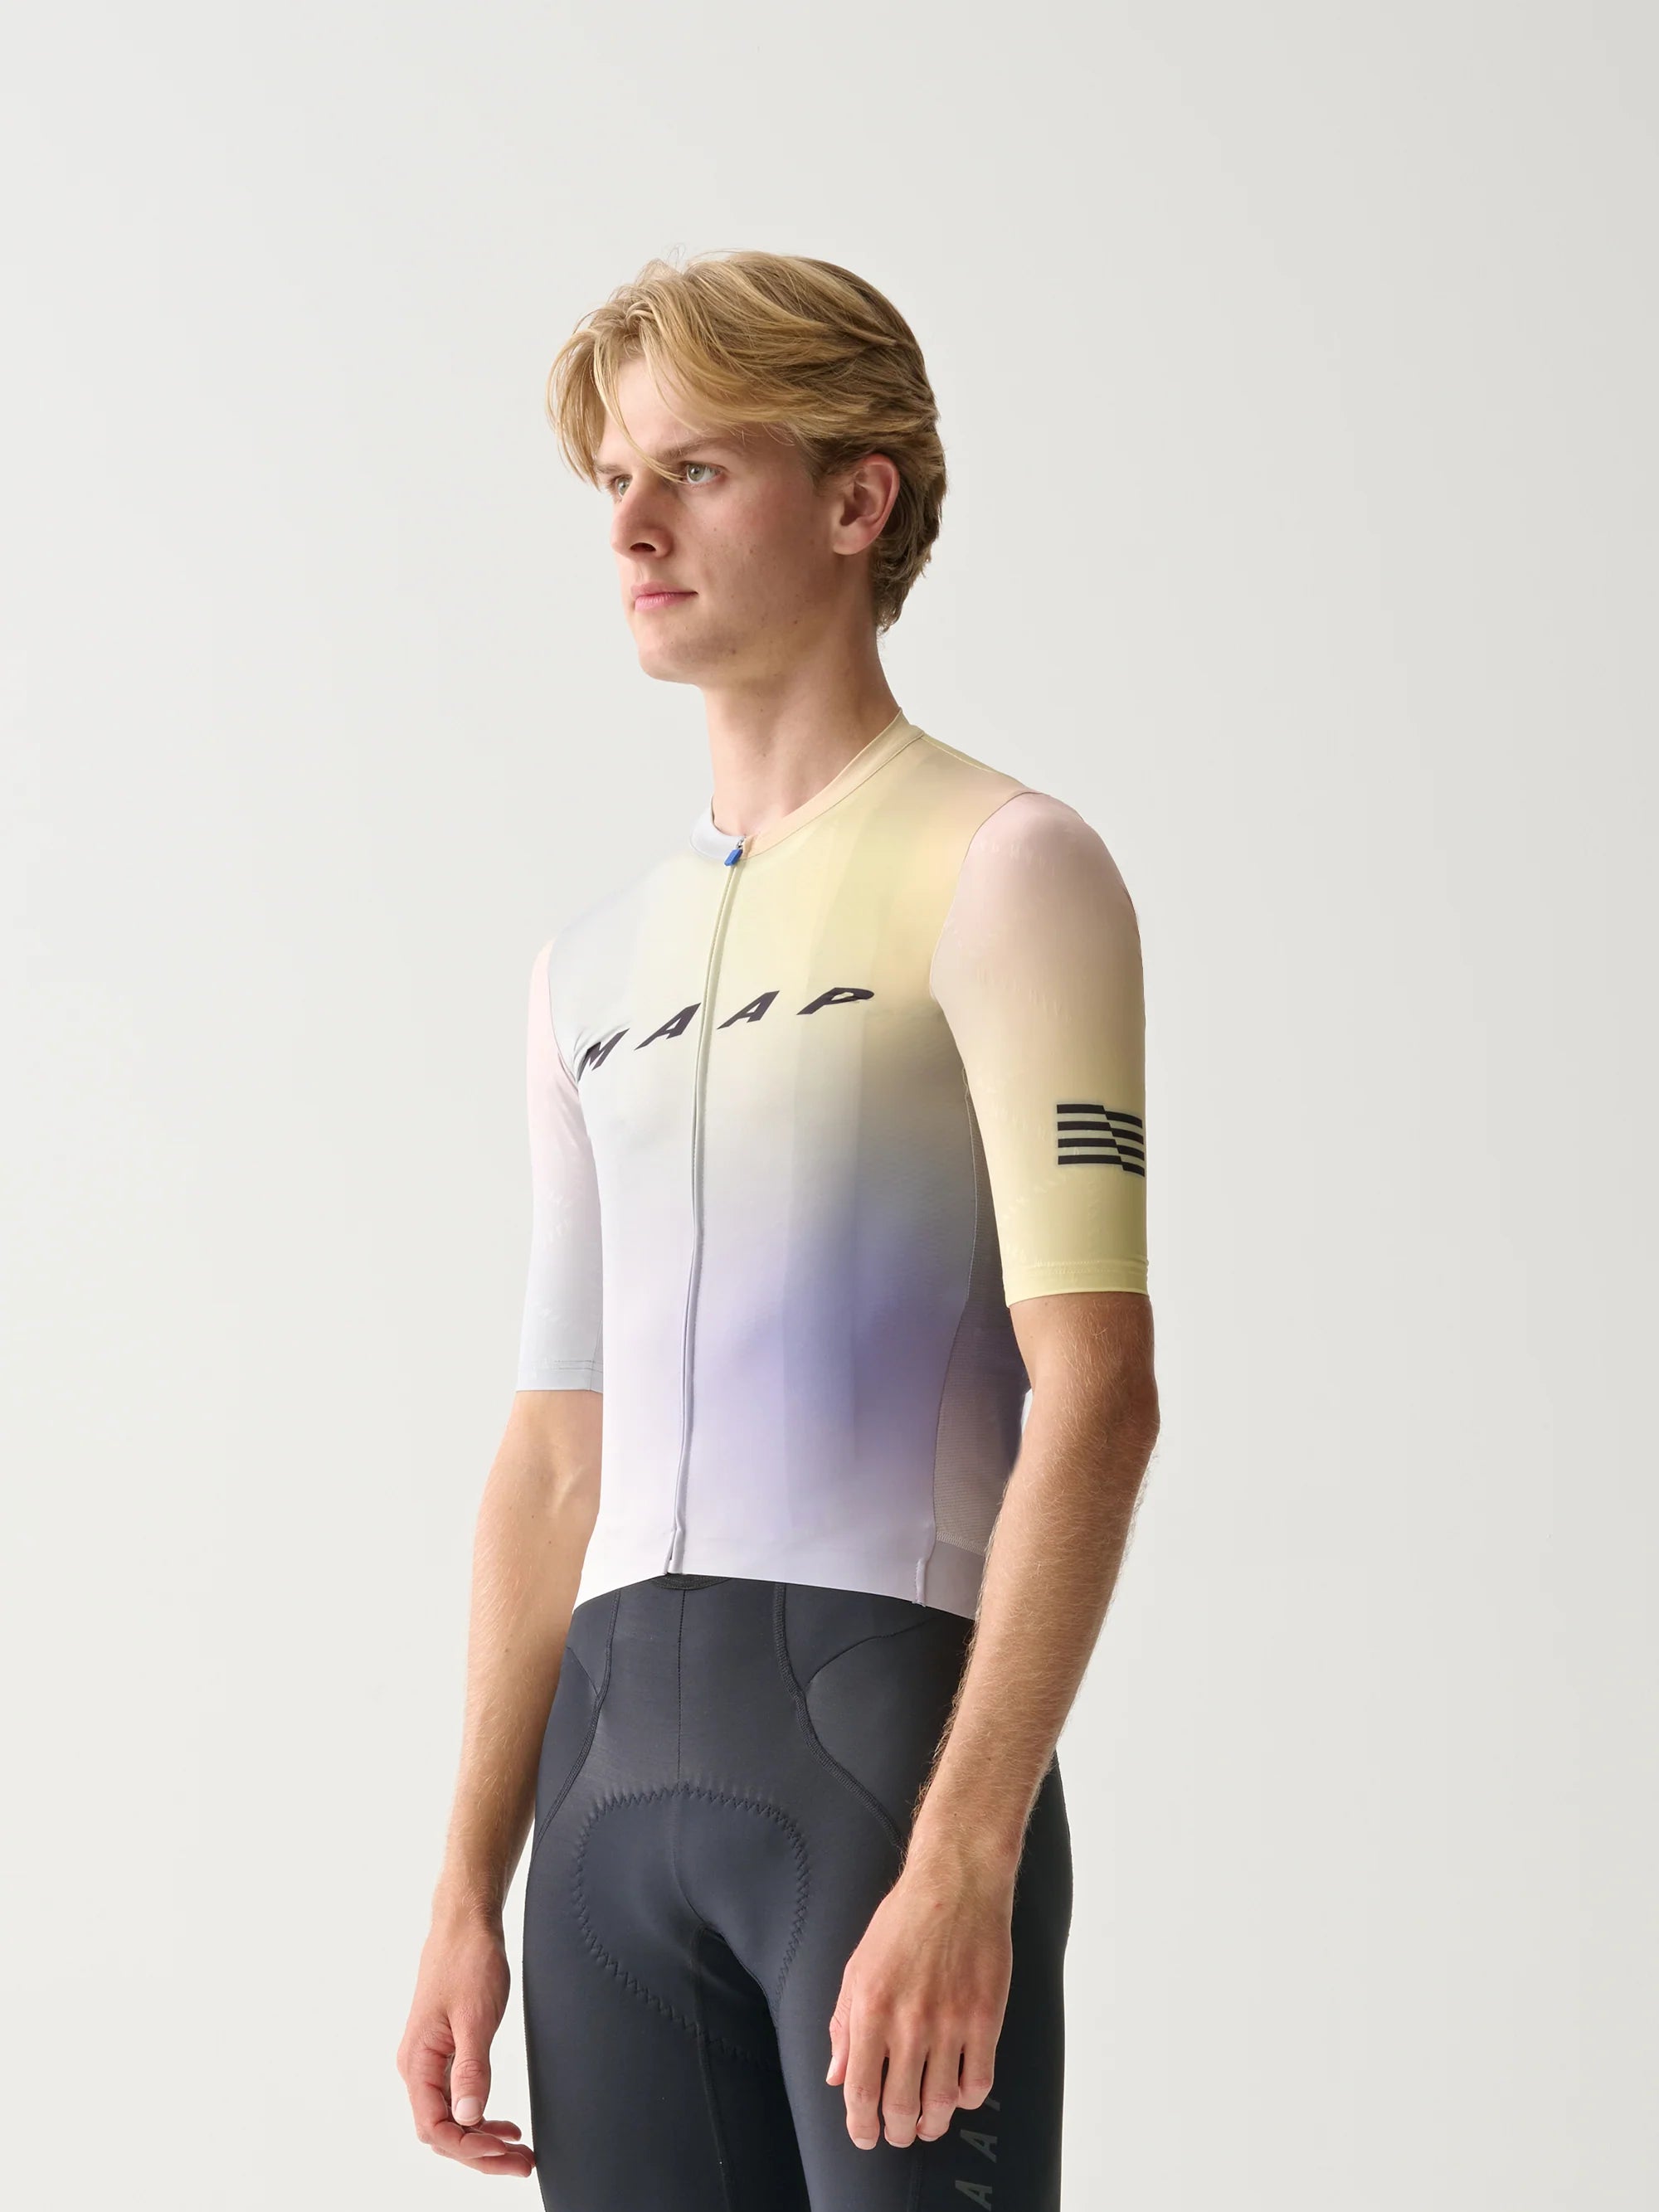 Blurred Out Pro Hex Jersey 2.0 Shell Mix | 高通気性・エアロダイナミクス・リサイクル素材 | CYCLISM